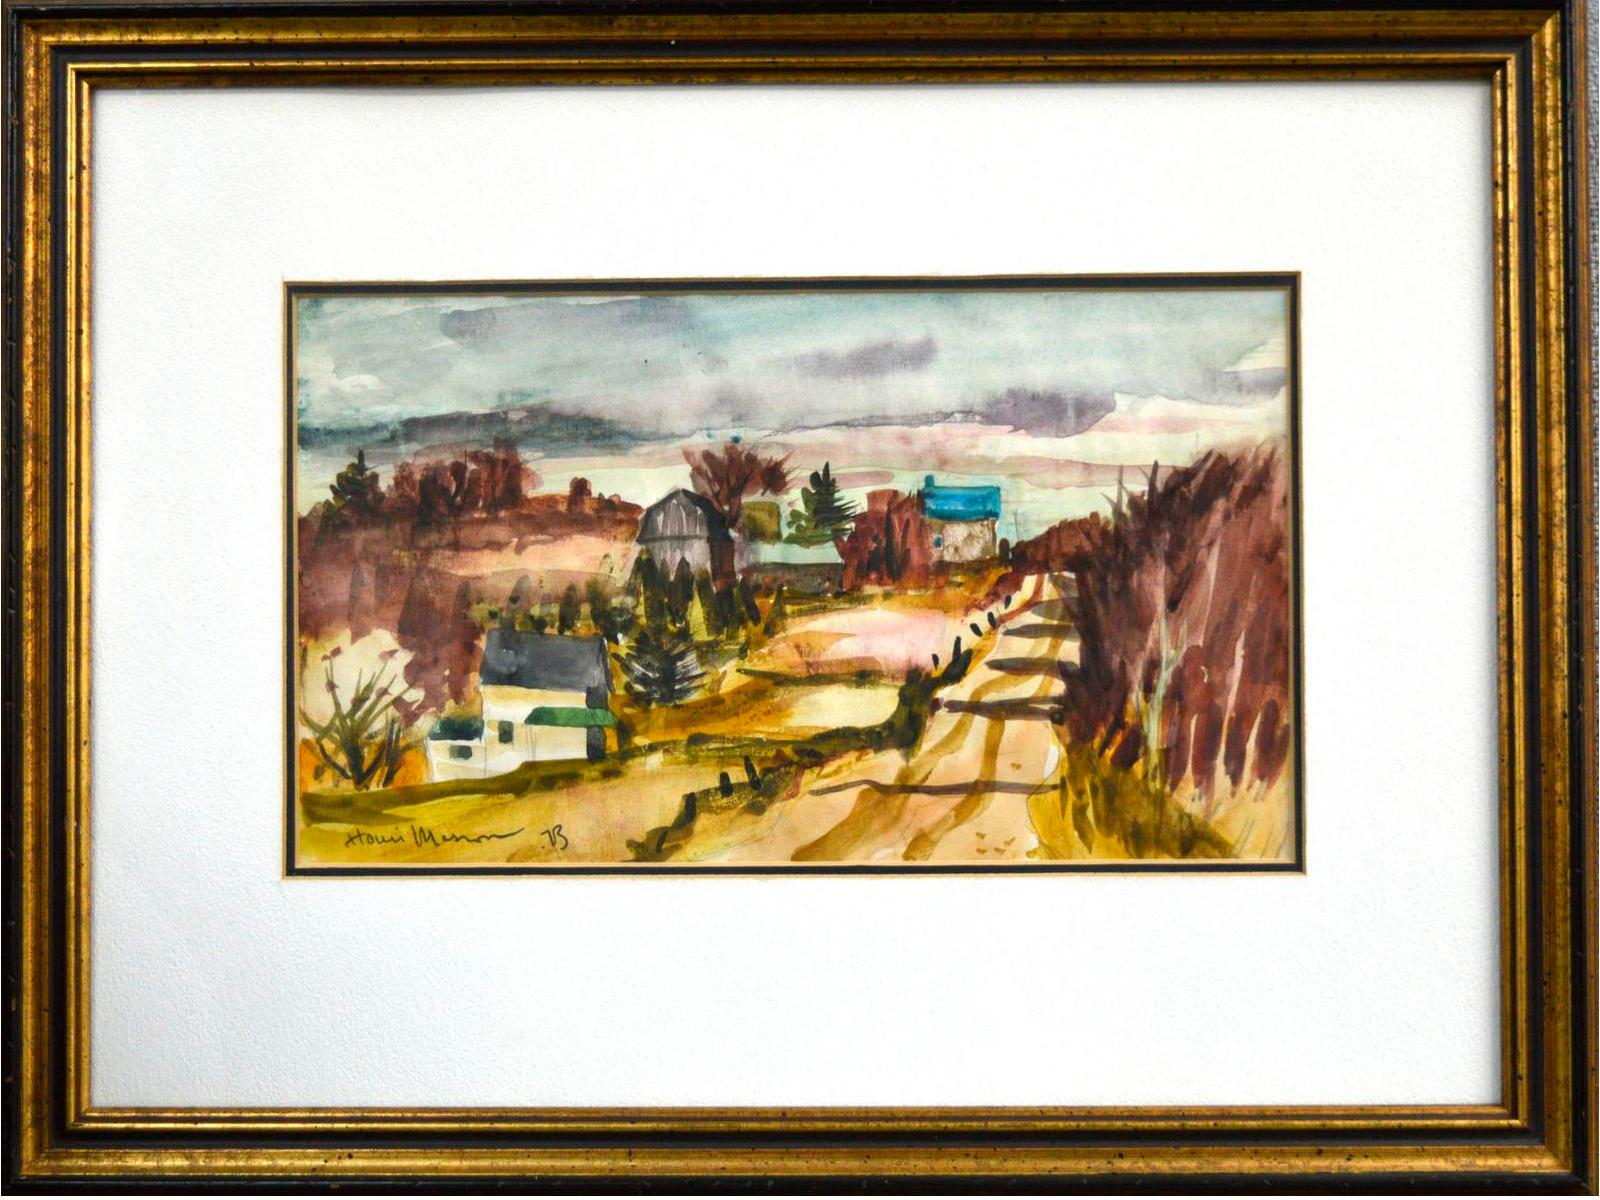 Henri Masson, 1907-1996, Canadian
UNTITLED, 1972
Watercolour
8 x 13 in
20 x 34 cm
Signed and dated ’73 lower left
framed